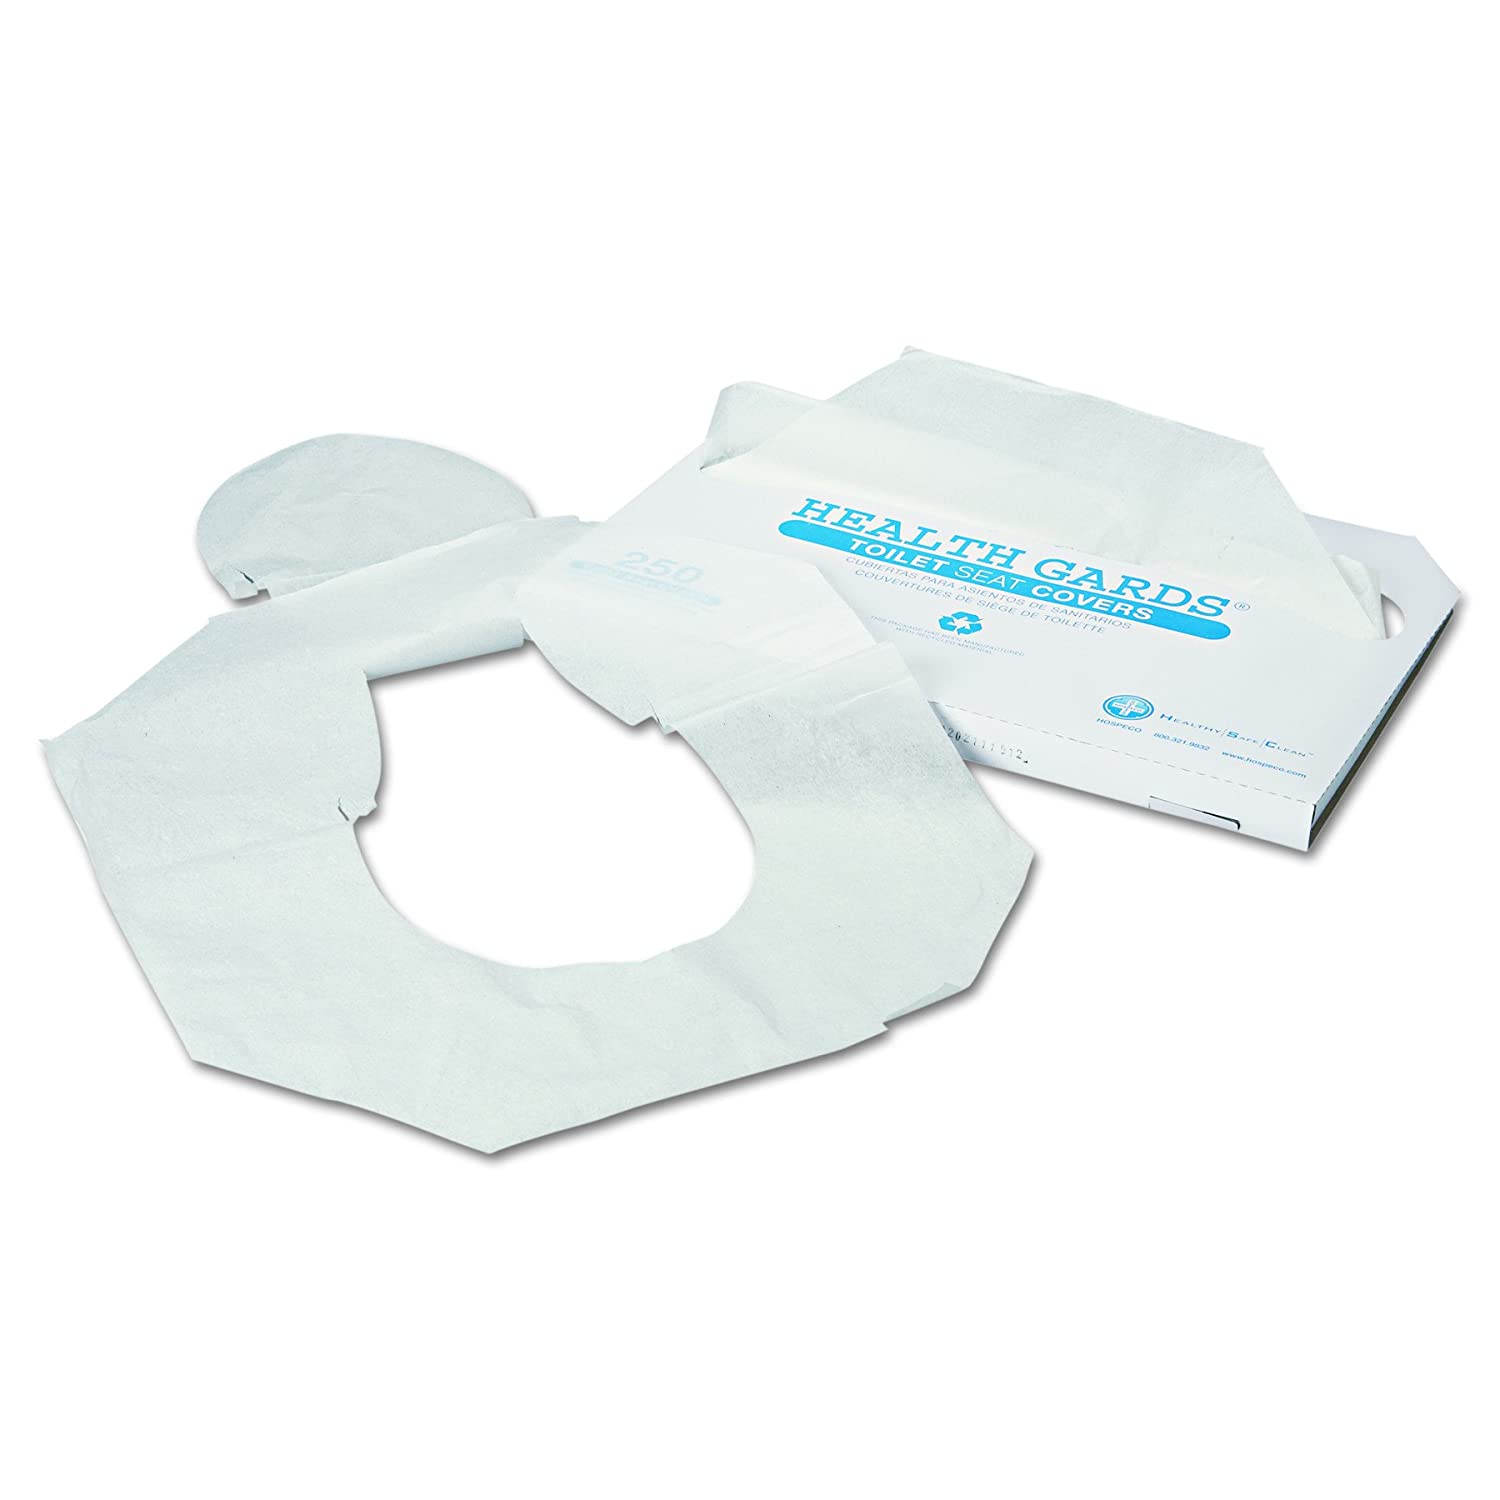 Health Gards Toilet Seat Covers- 1000/case